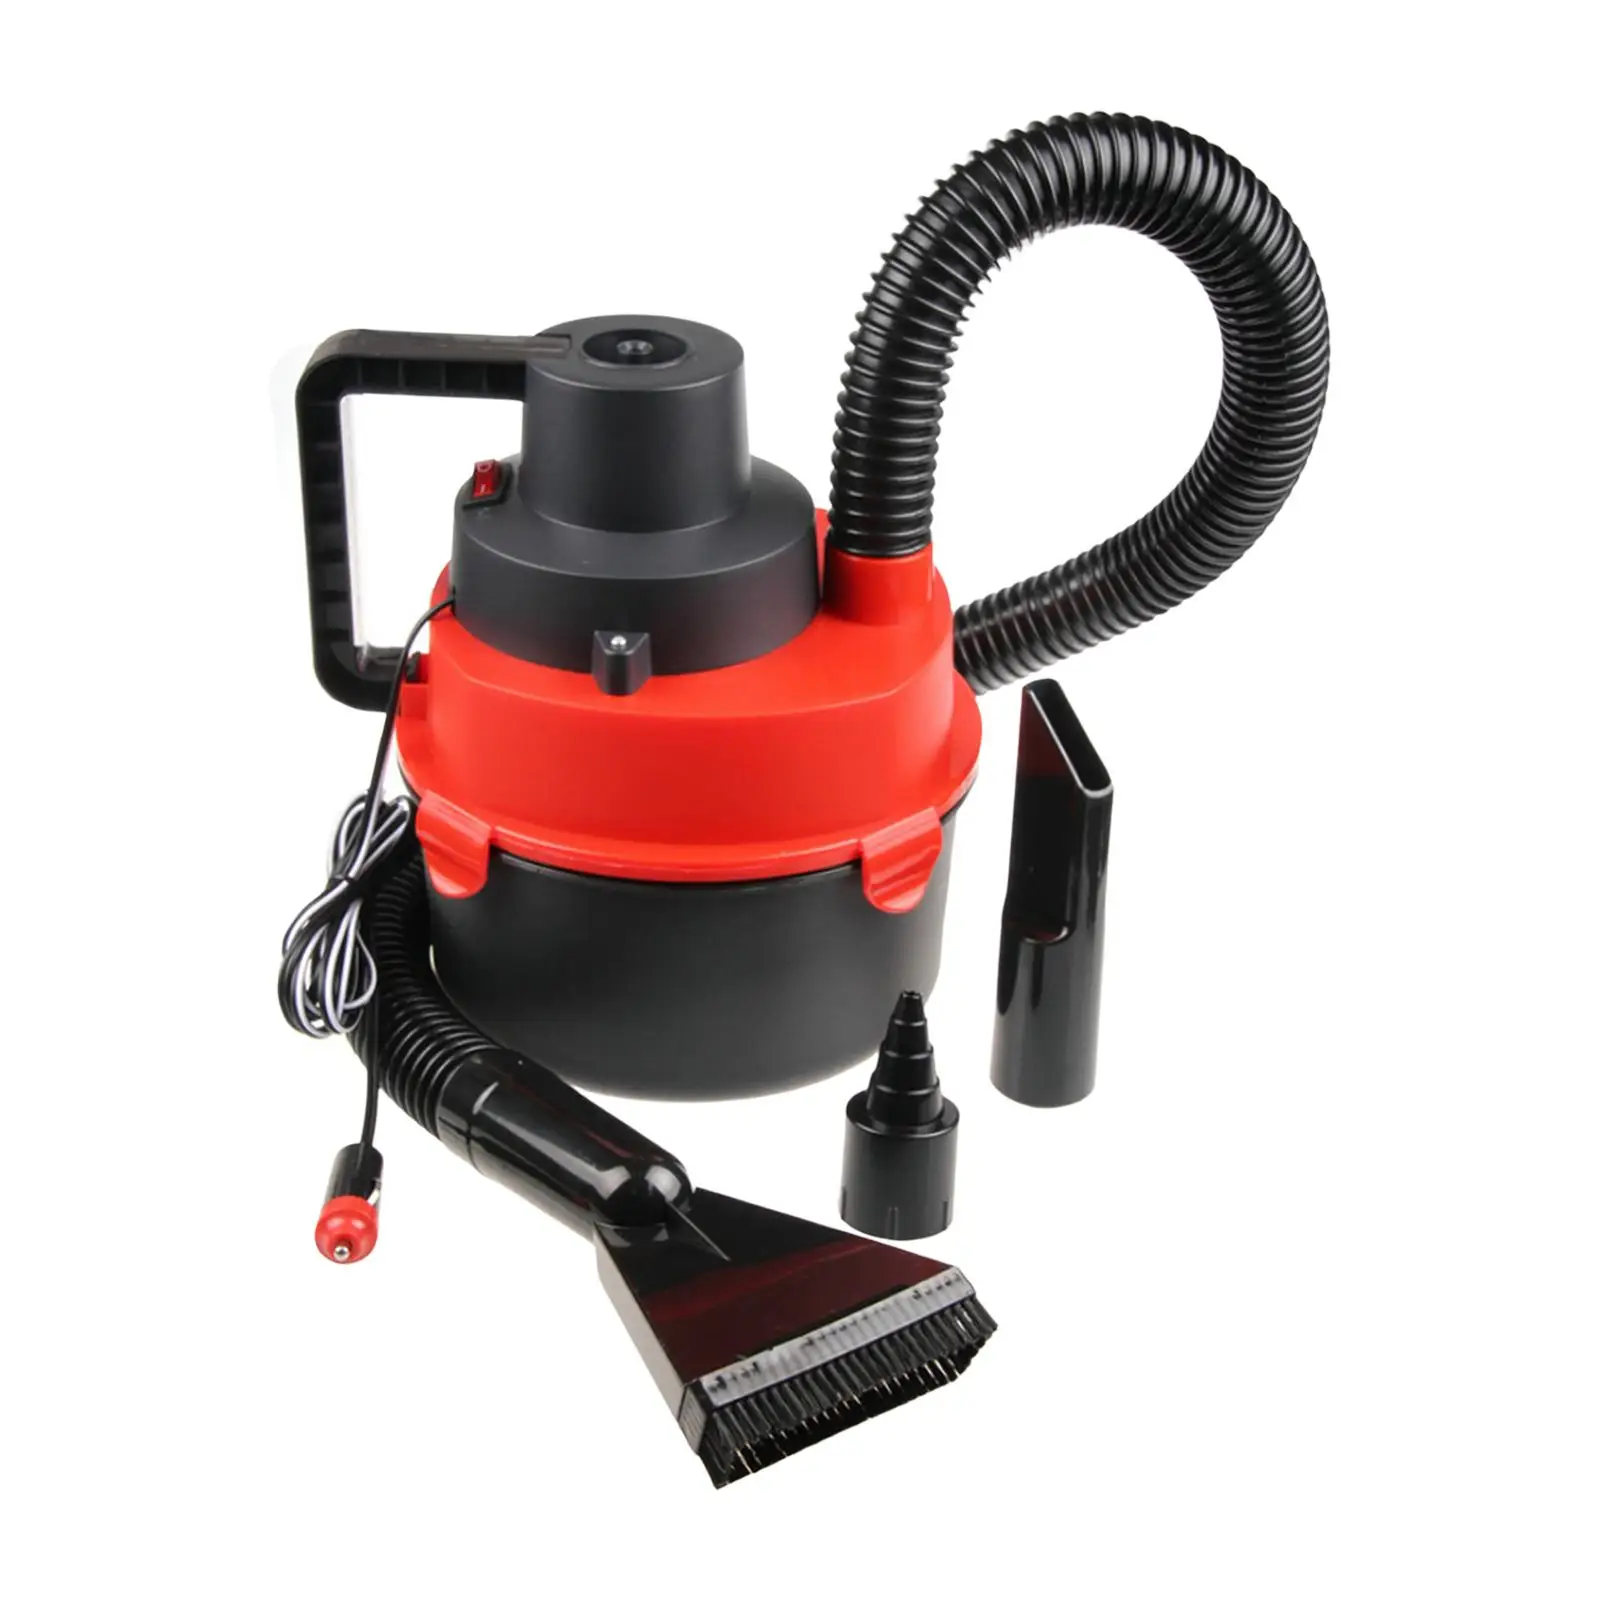 12V Wet/Dry Car Canister Vacuum 3 Nozzle Attachments Versatile Wet or Dry Pickup for Boats and RV 100cm Soft Hose Air Compressor